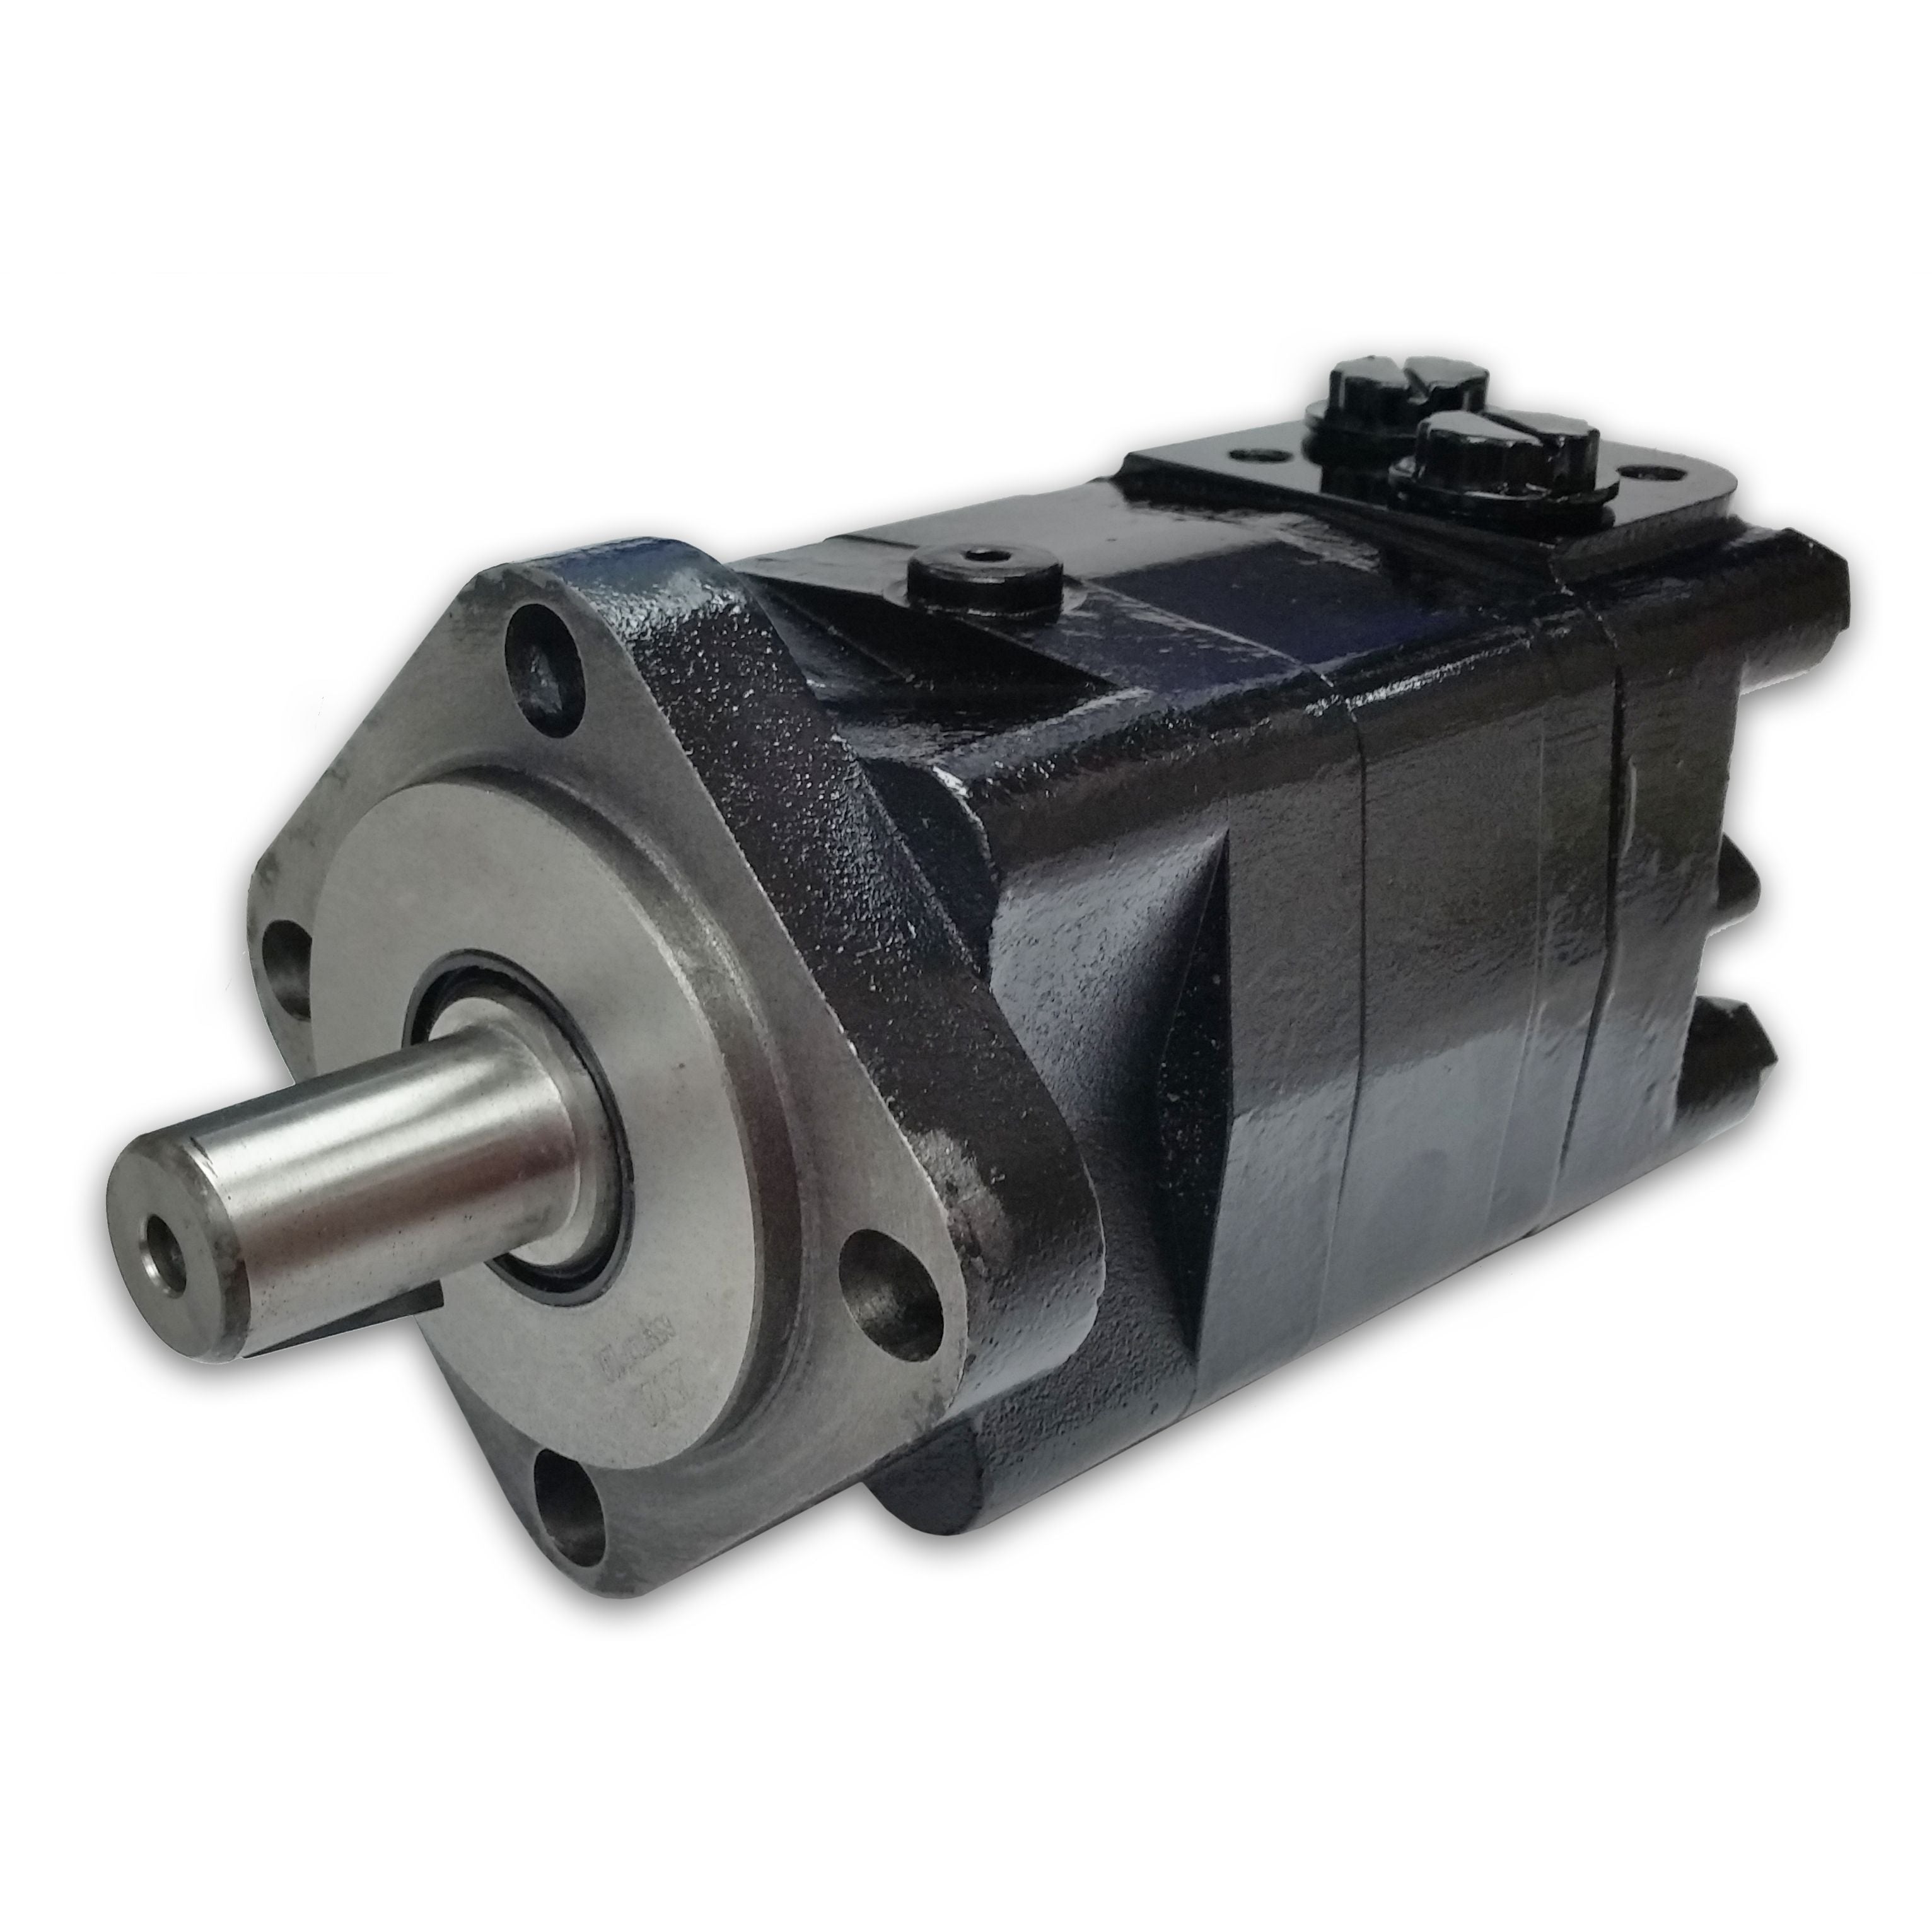 BMSY-400-E4-K-S : Dynamic LSHT Motor, 394cc, 185RPM, 7786in-lb, 2320psi Differential, 19.81GPM, SAE A 4-Bolt Mount, 1" Bore x 1/4" Key Shaft, Side Ported, #10 SAE (5/8")